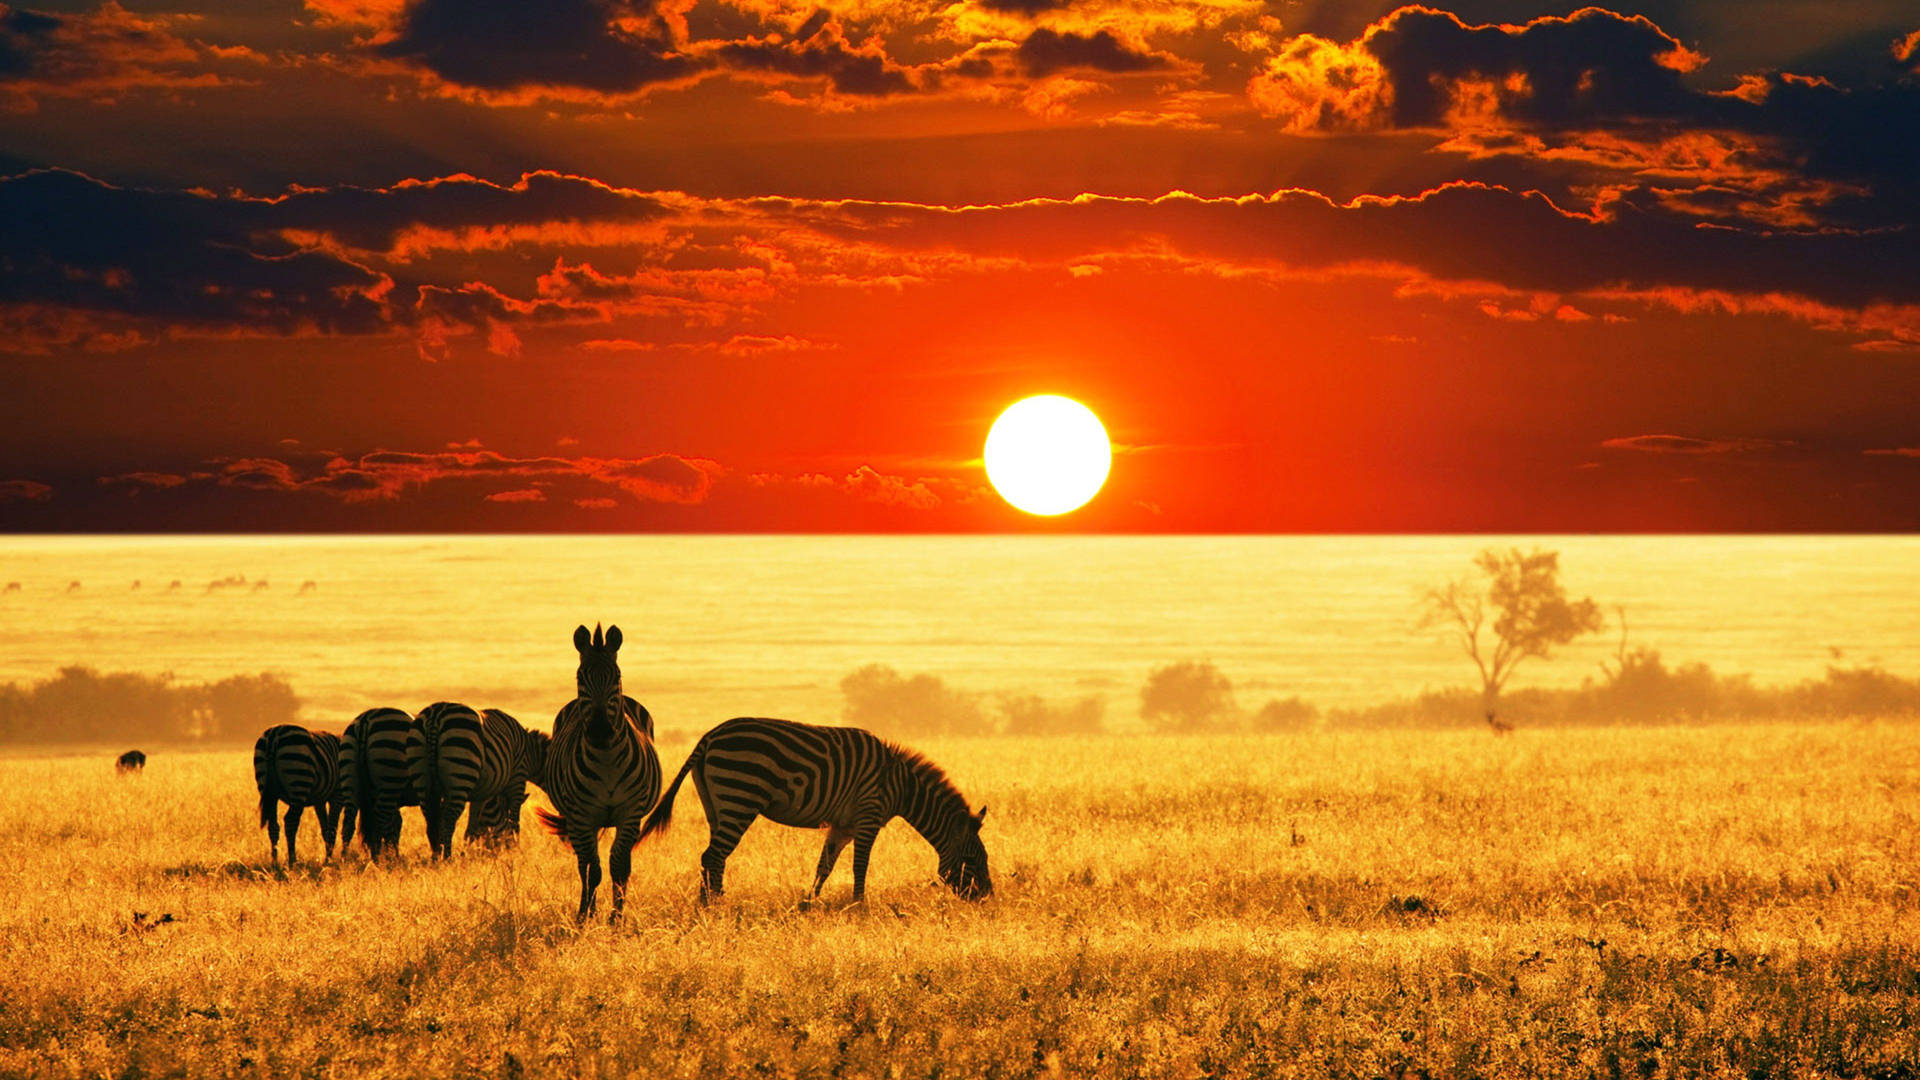 Zebra And Sunset In Africa Picture